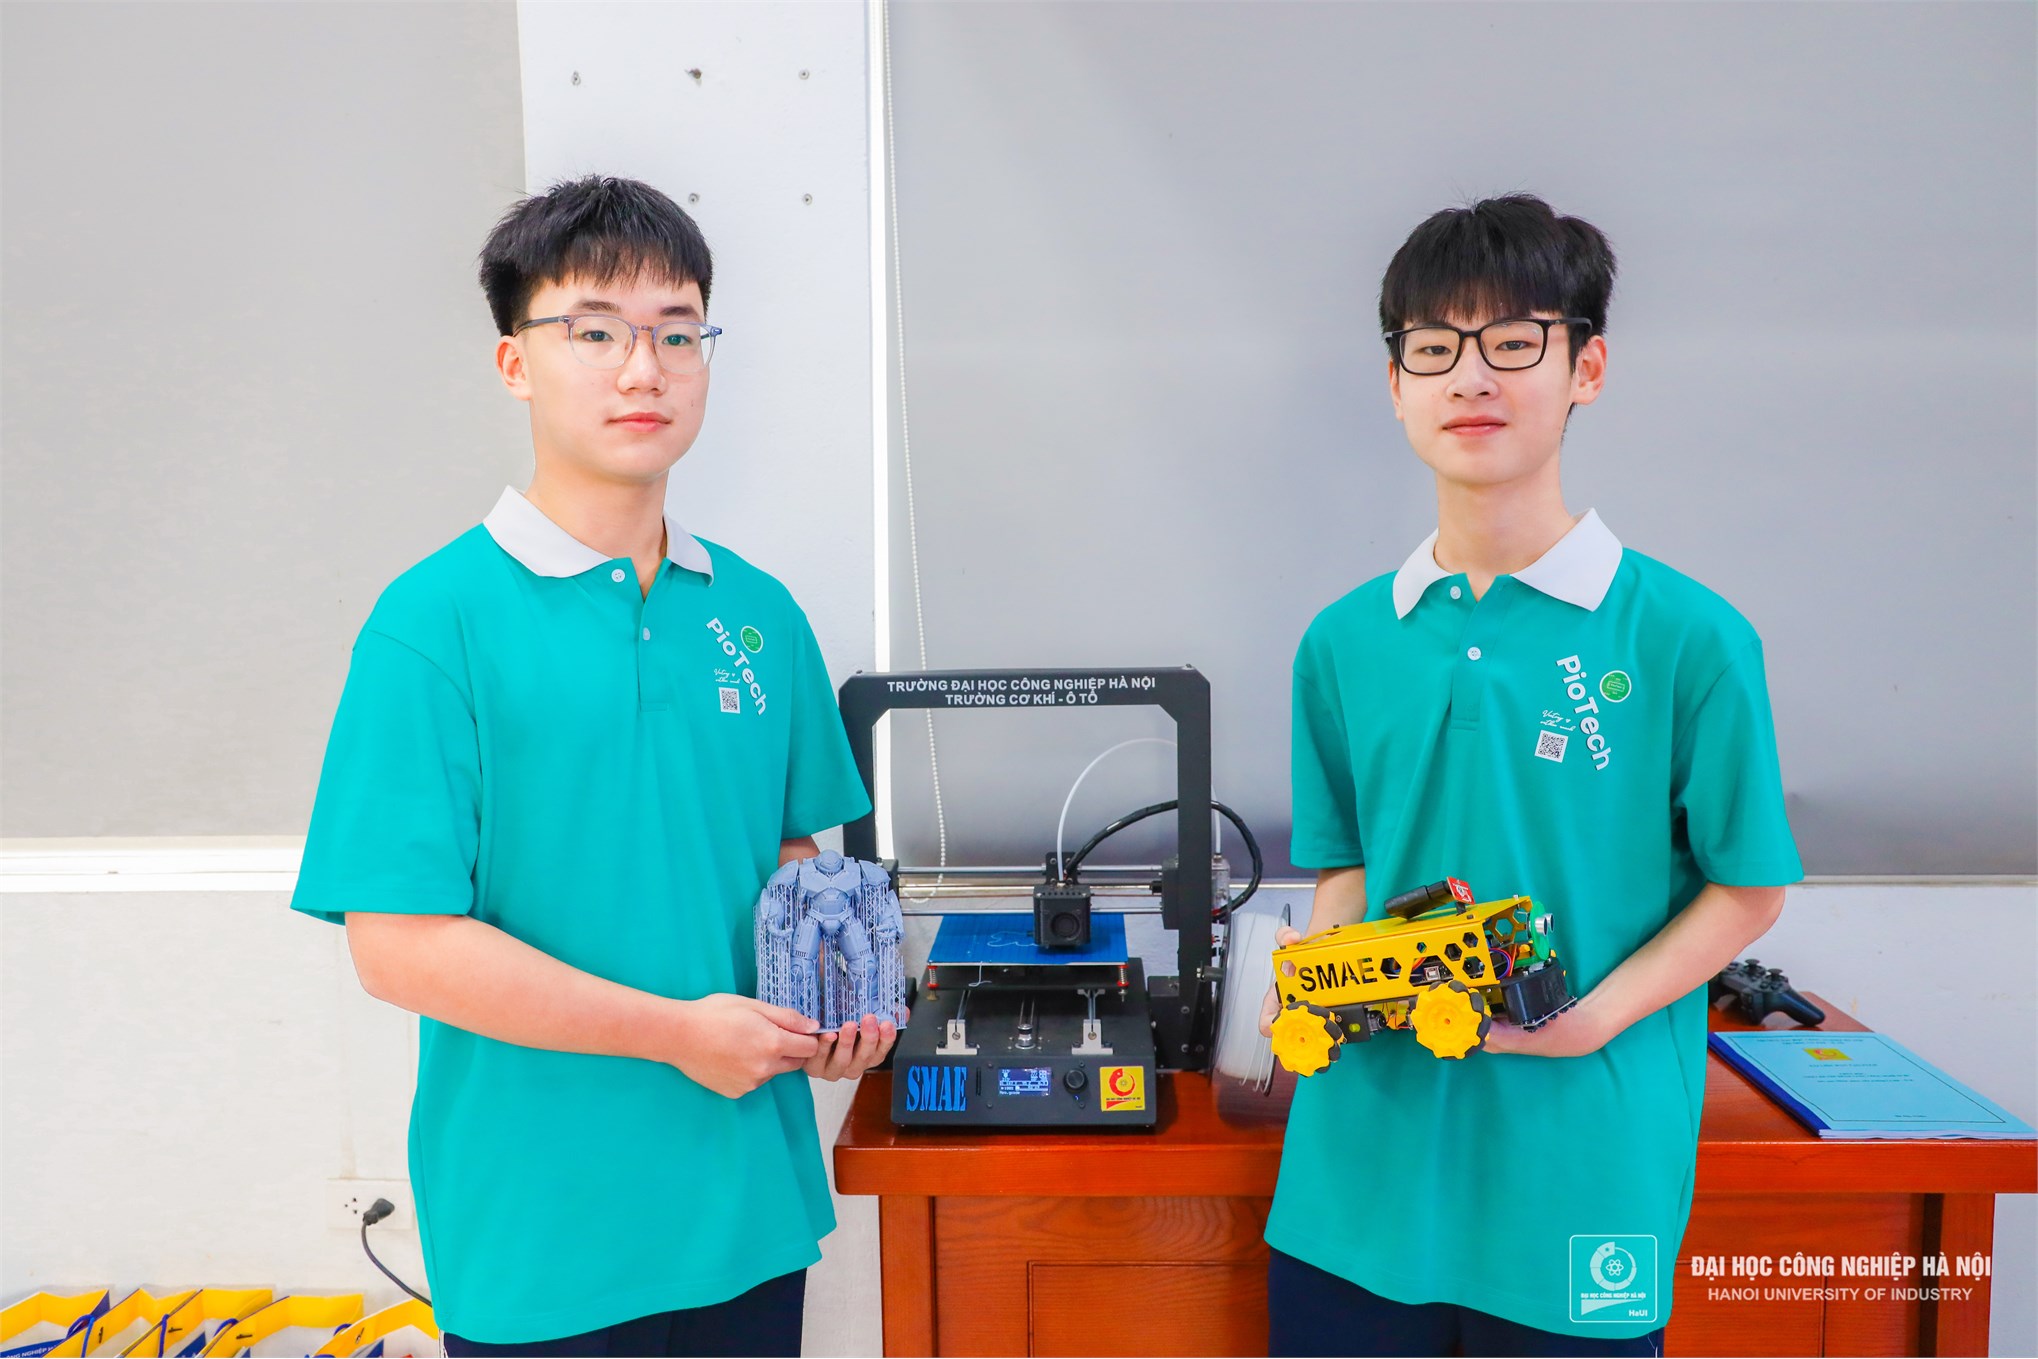 The collaboration with Quoc Oai High School reflects HaUI’s commitment to playing an active role in the community, fostering educational growth, and supporting sustainable development